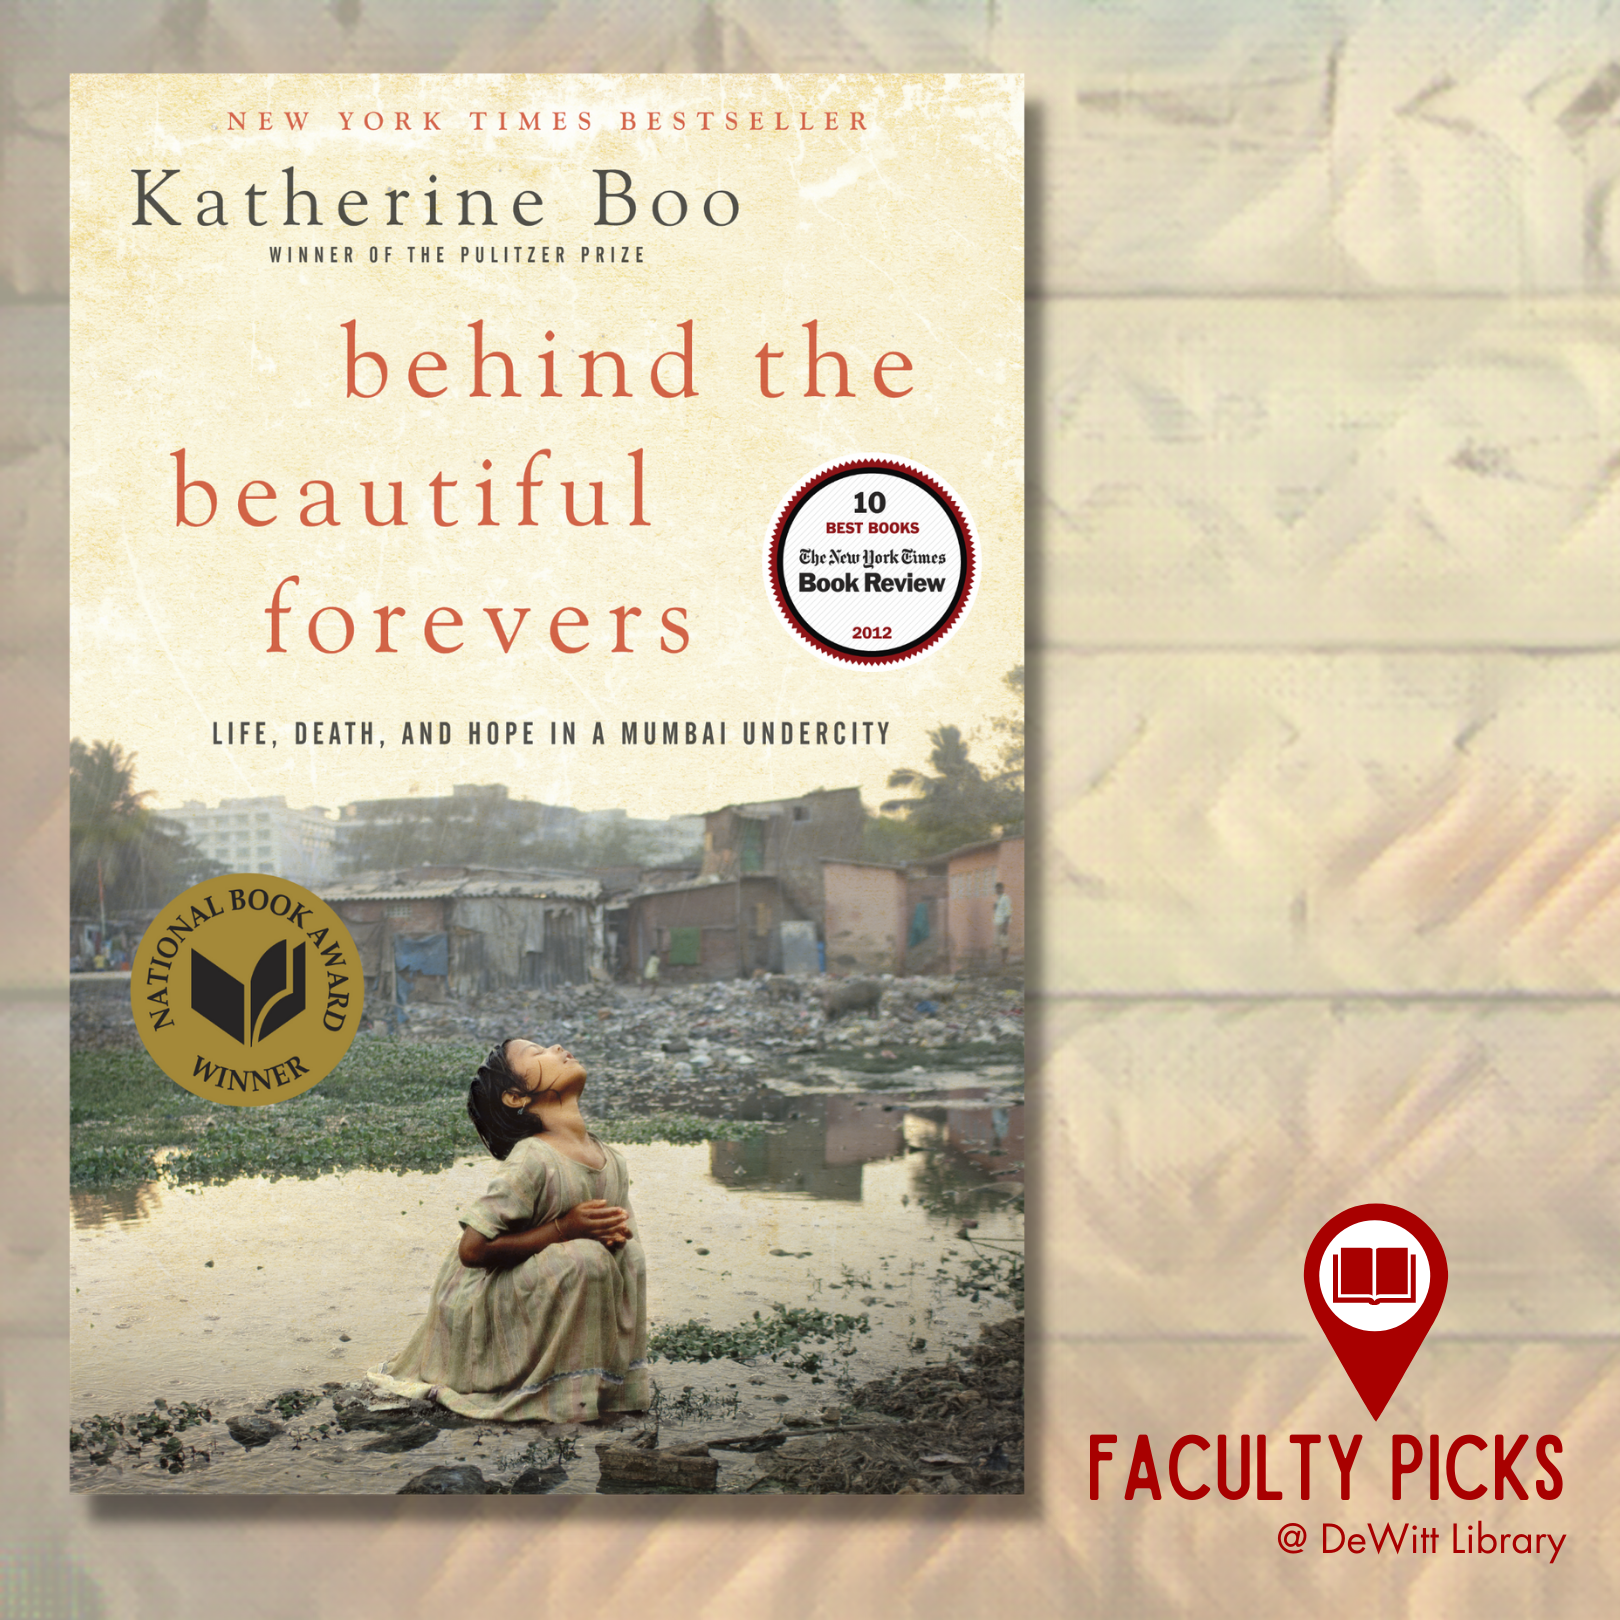 Faculty Picks - Behind the Beautiful Forevers by Katherine Boo 